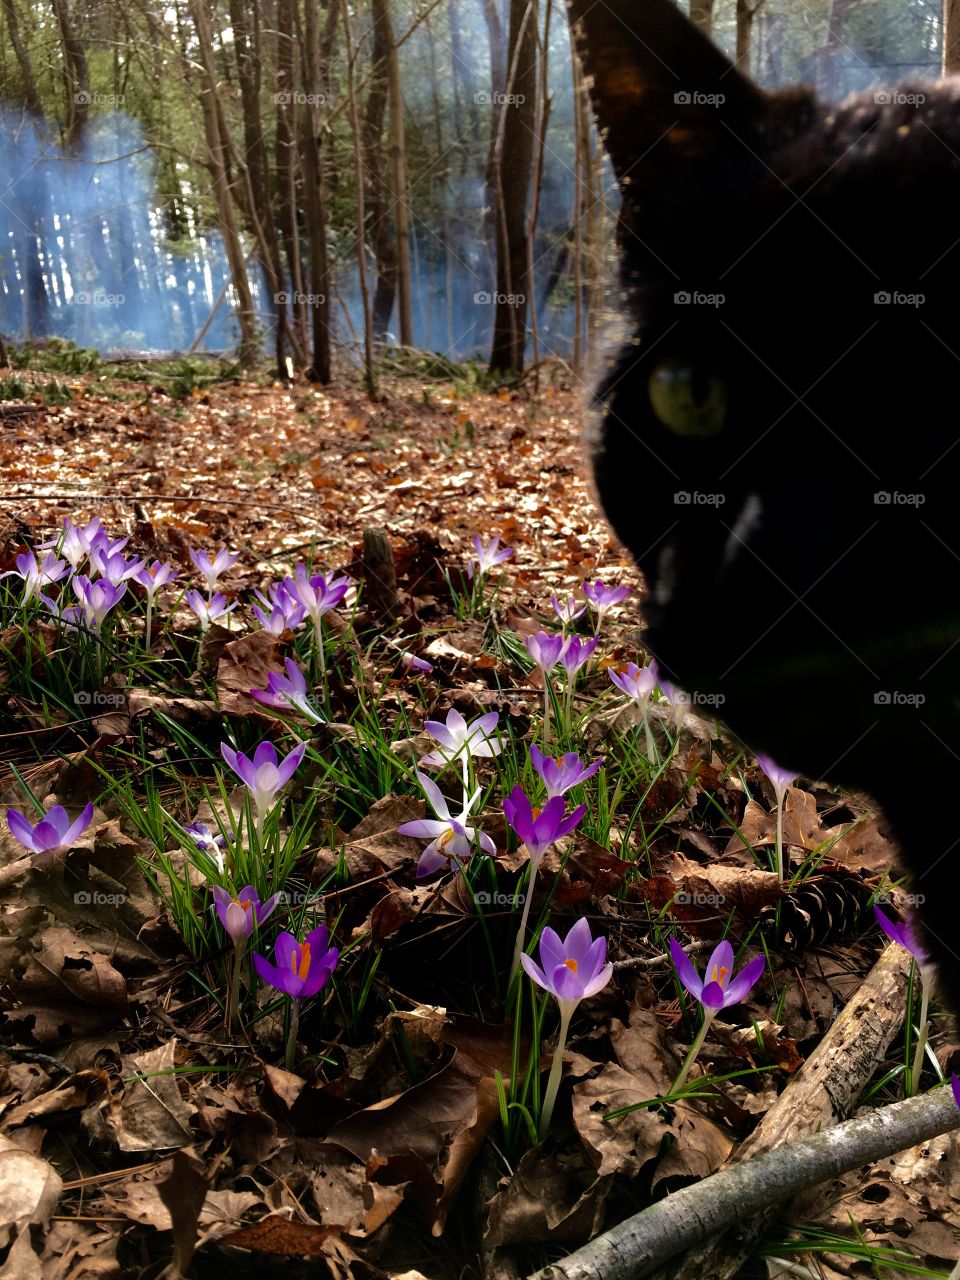 Crocuses in Woods With Black Cat, Forest in Background With Smoke